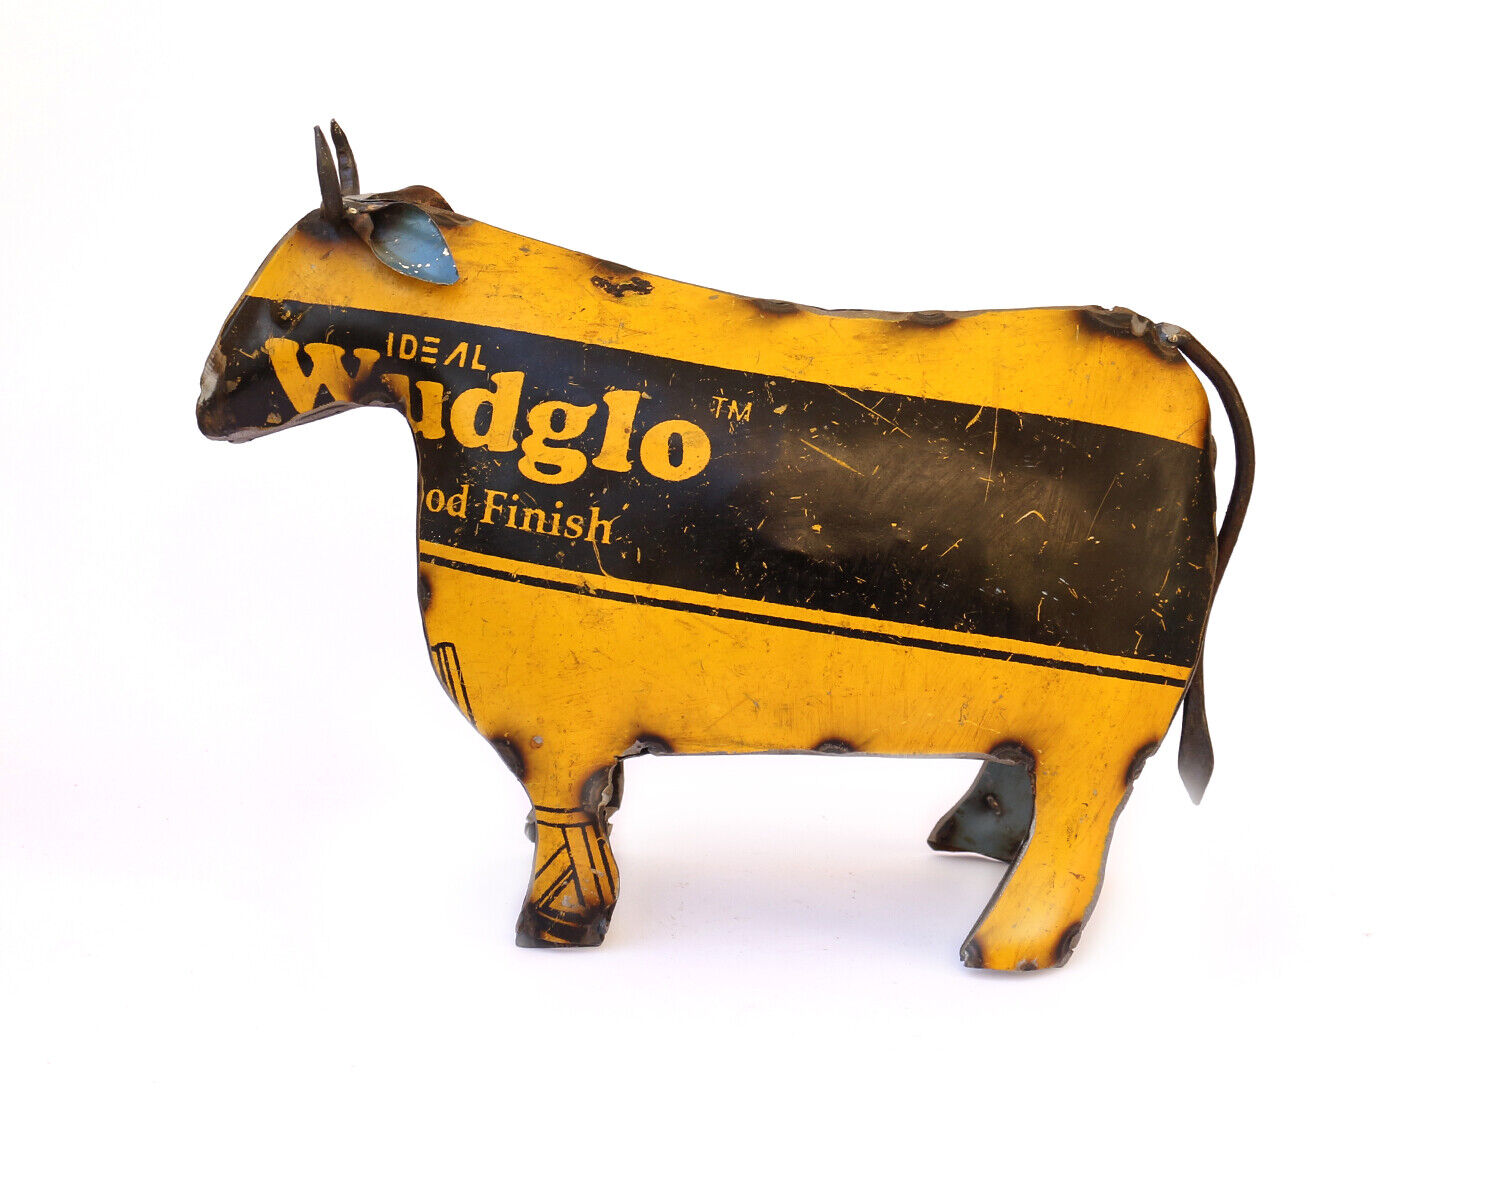 De Kulture Handcrafted Recycled Iron Cow Decorative Collectible Garden Figurine